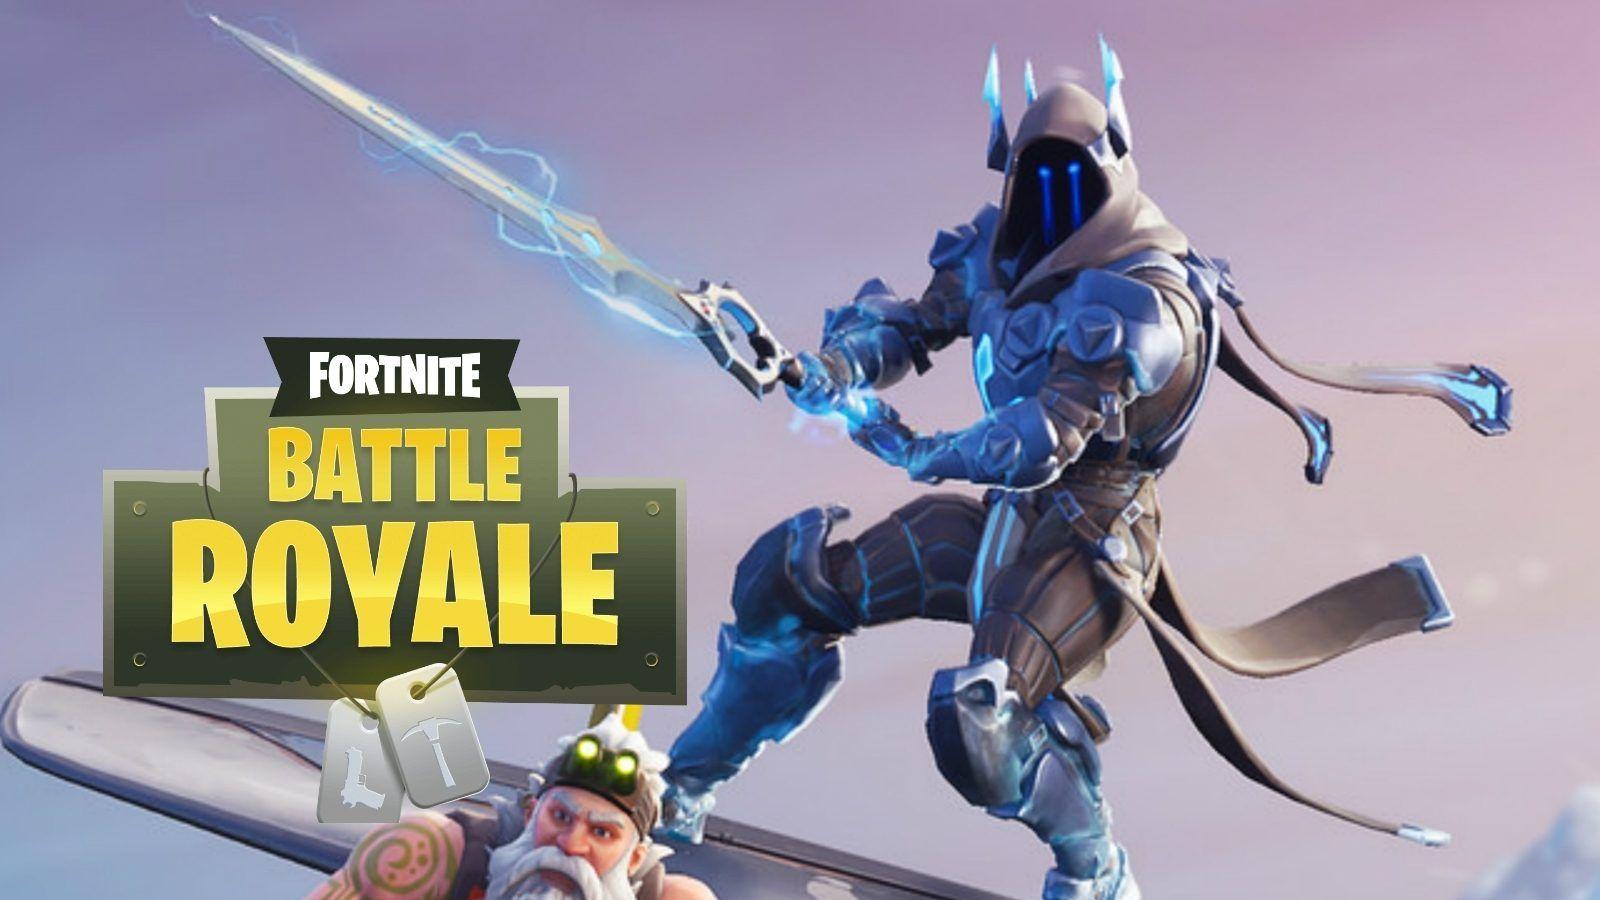 Swords May Be Coming to Battle Royale in Fortnite